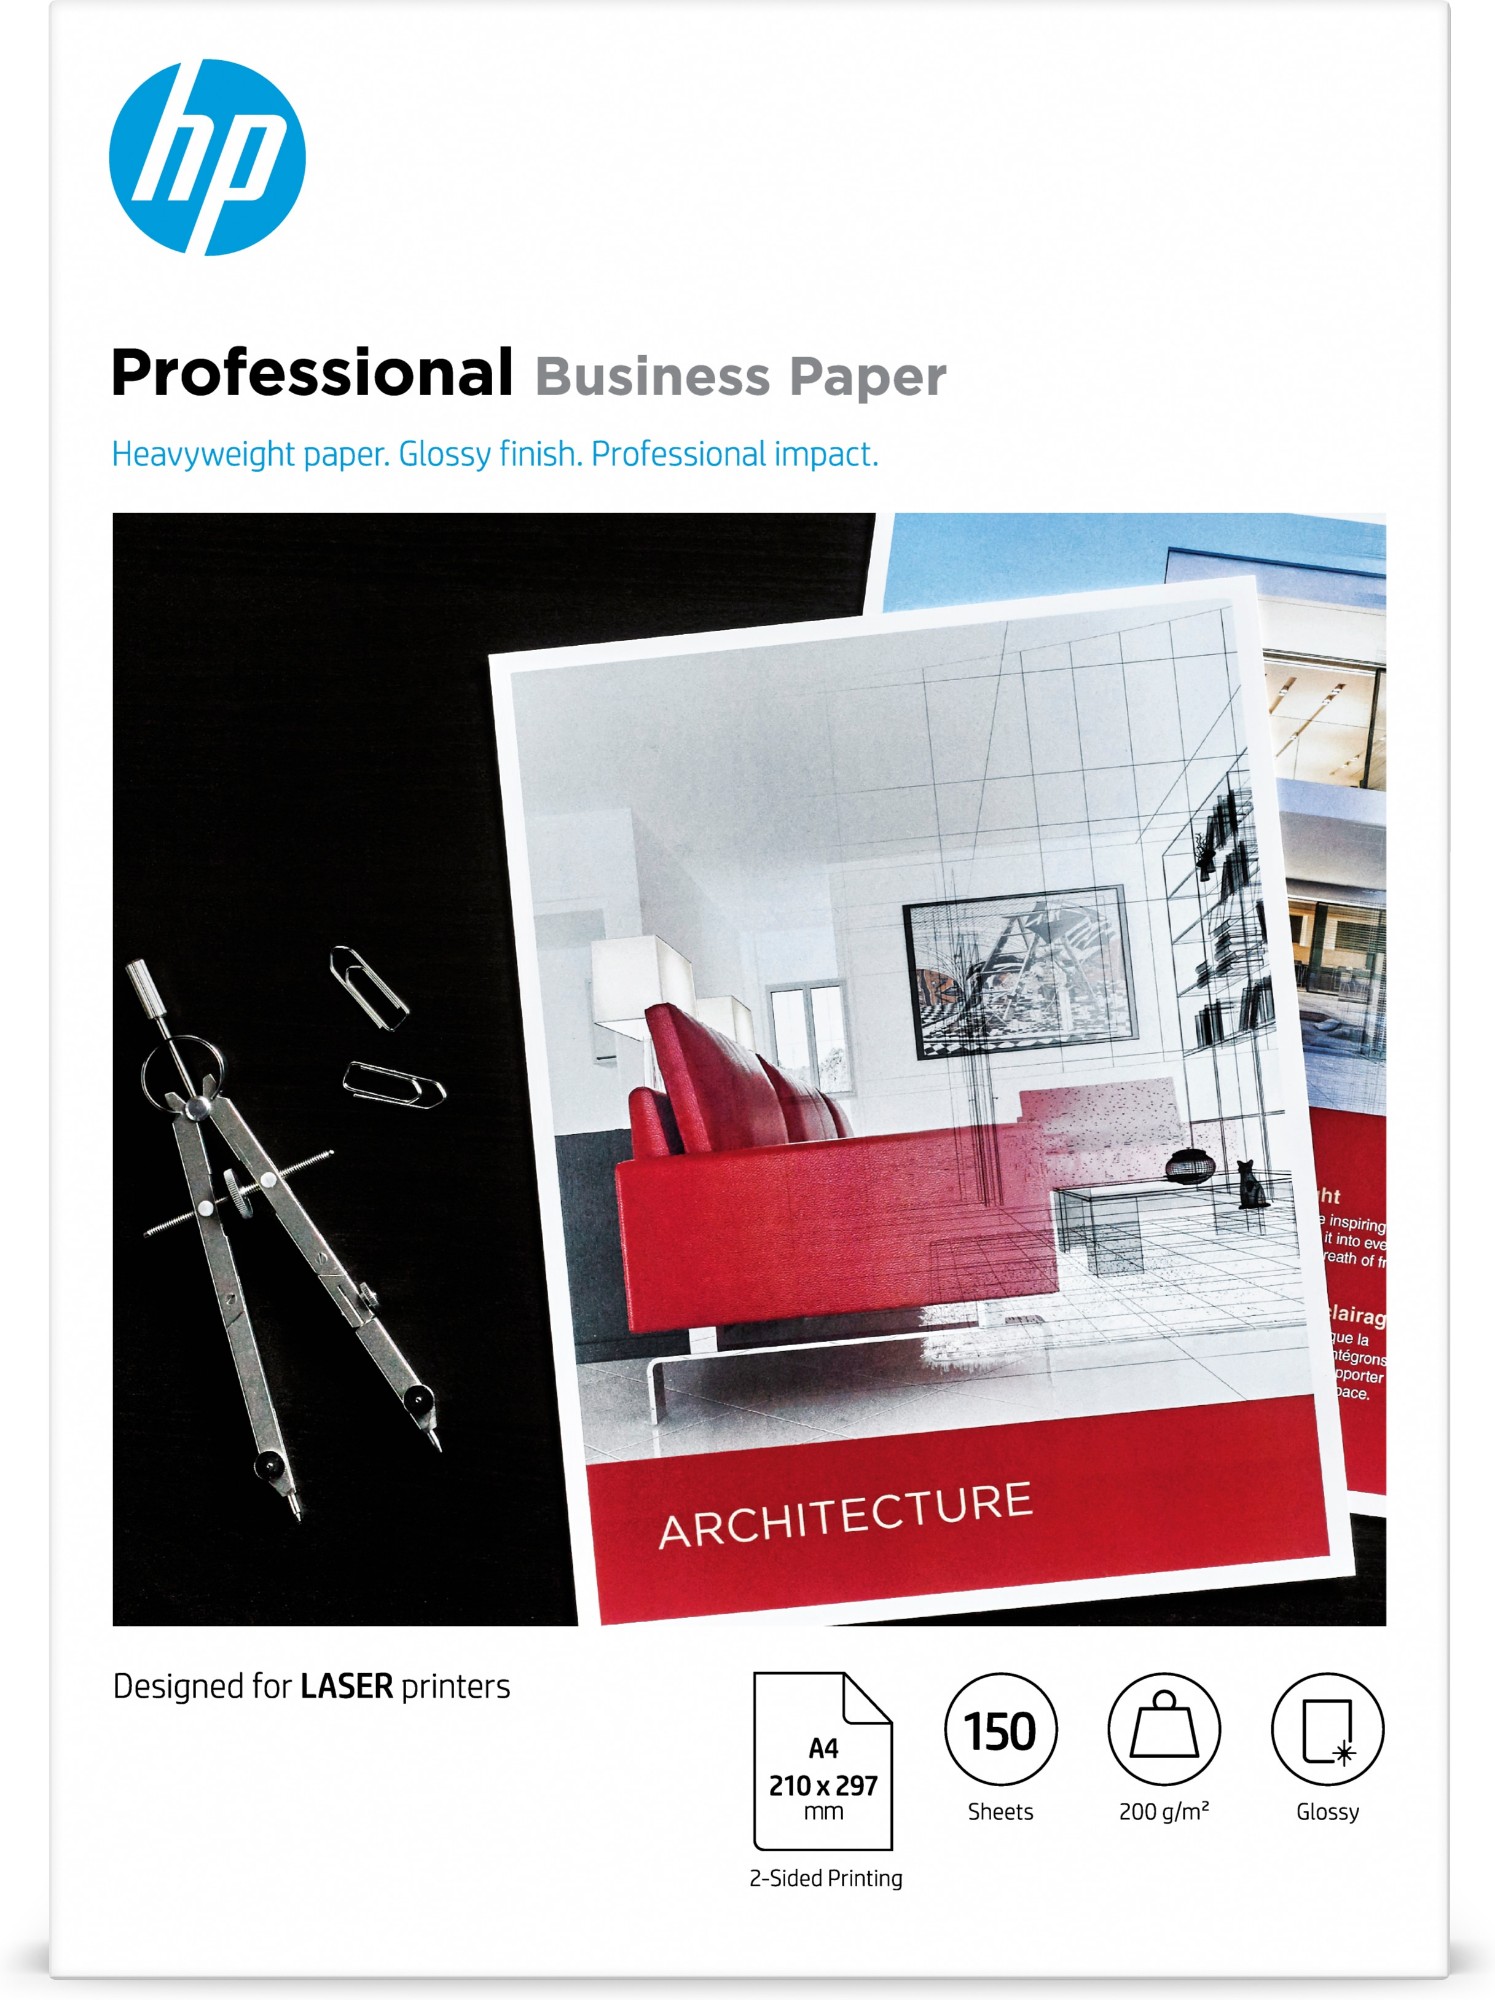 HP Laser Professional Business Paper A4, Glossy, 200gsm